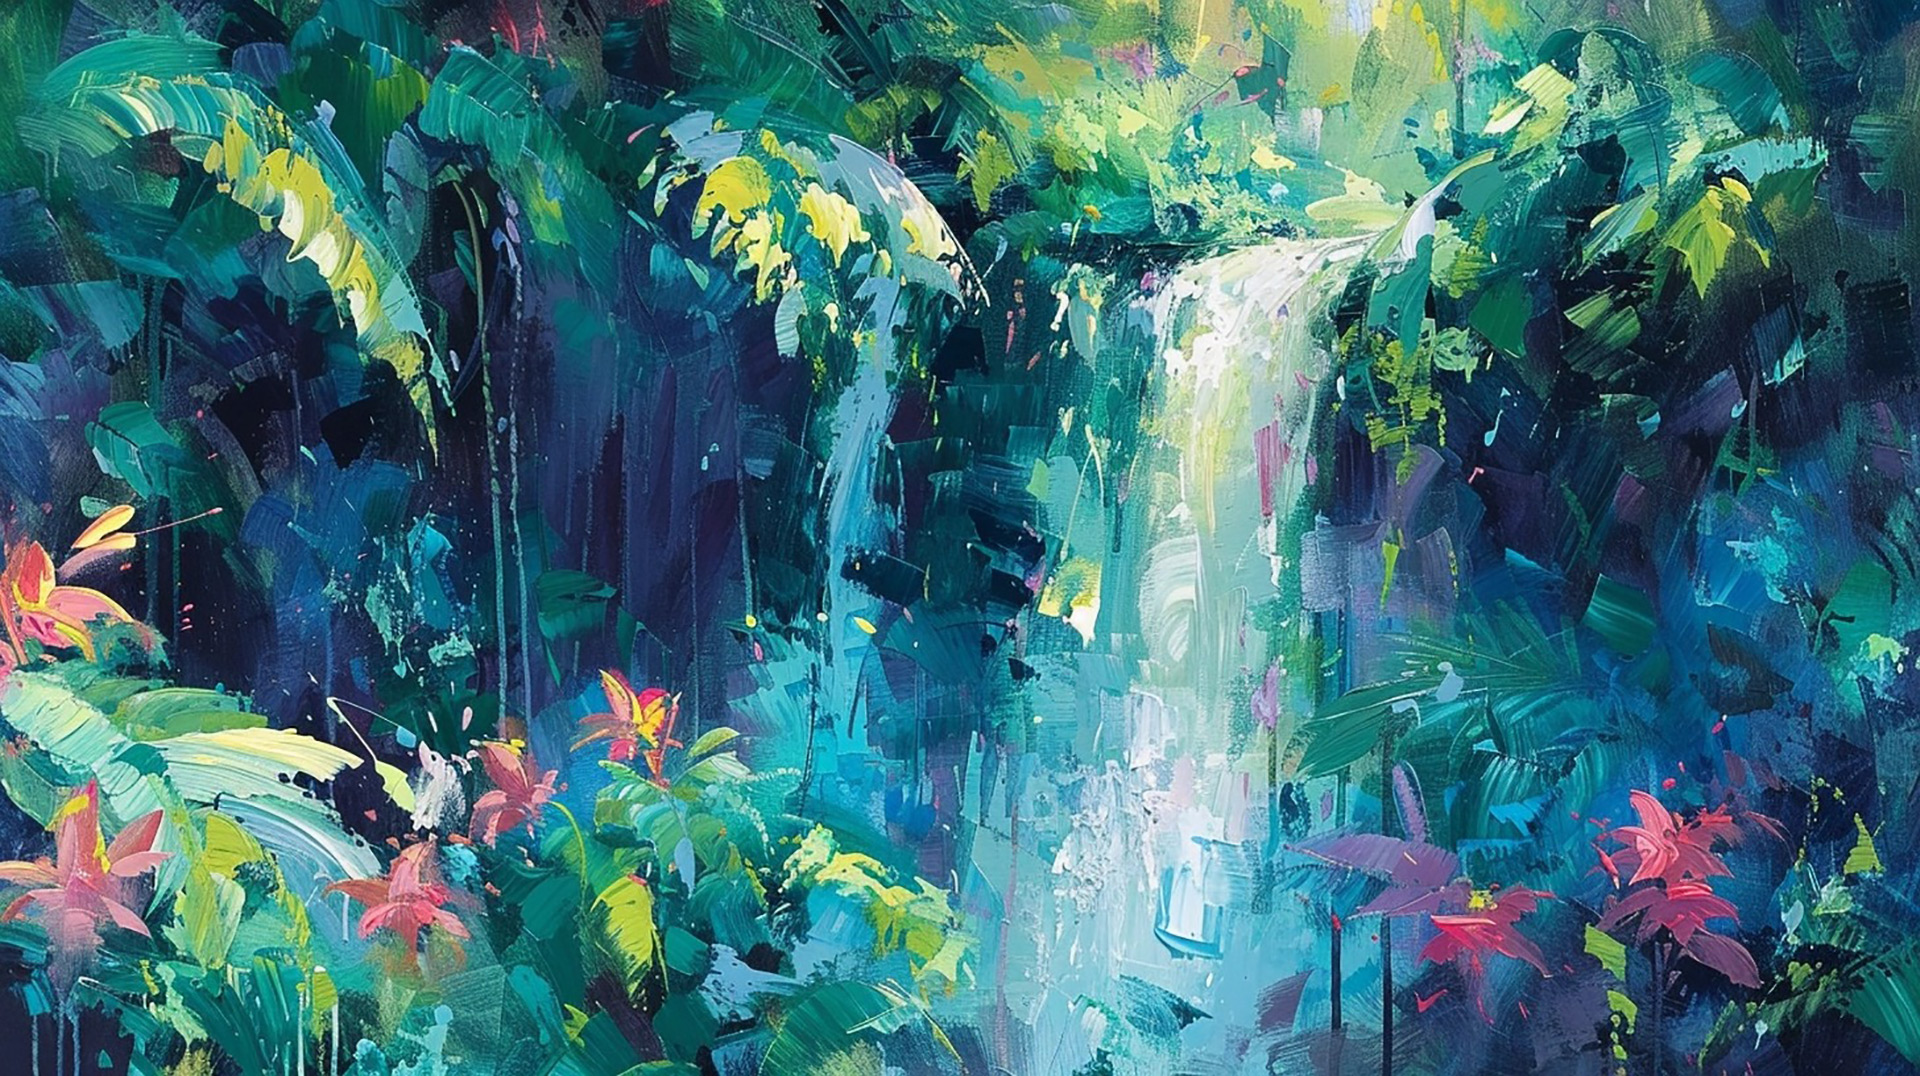 Palette of the Tropics: Colorful Jungle Art in 4K